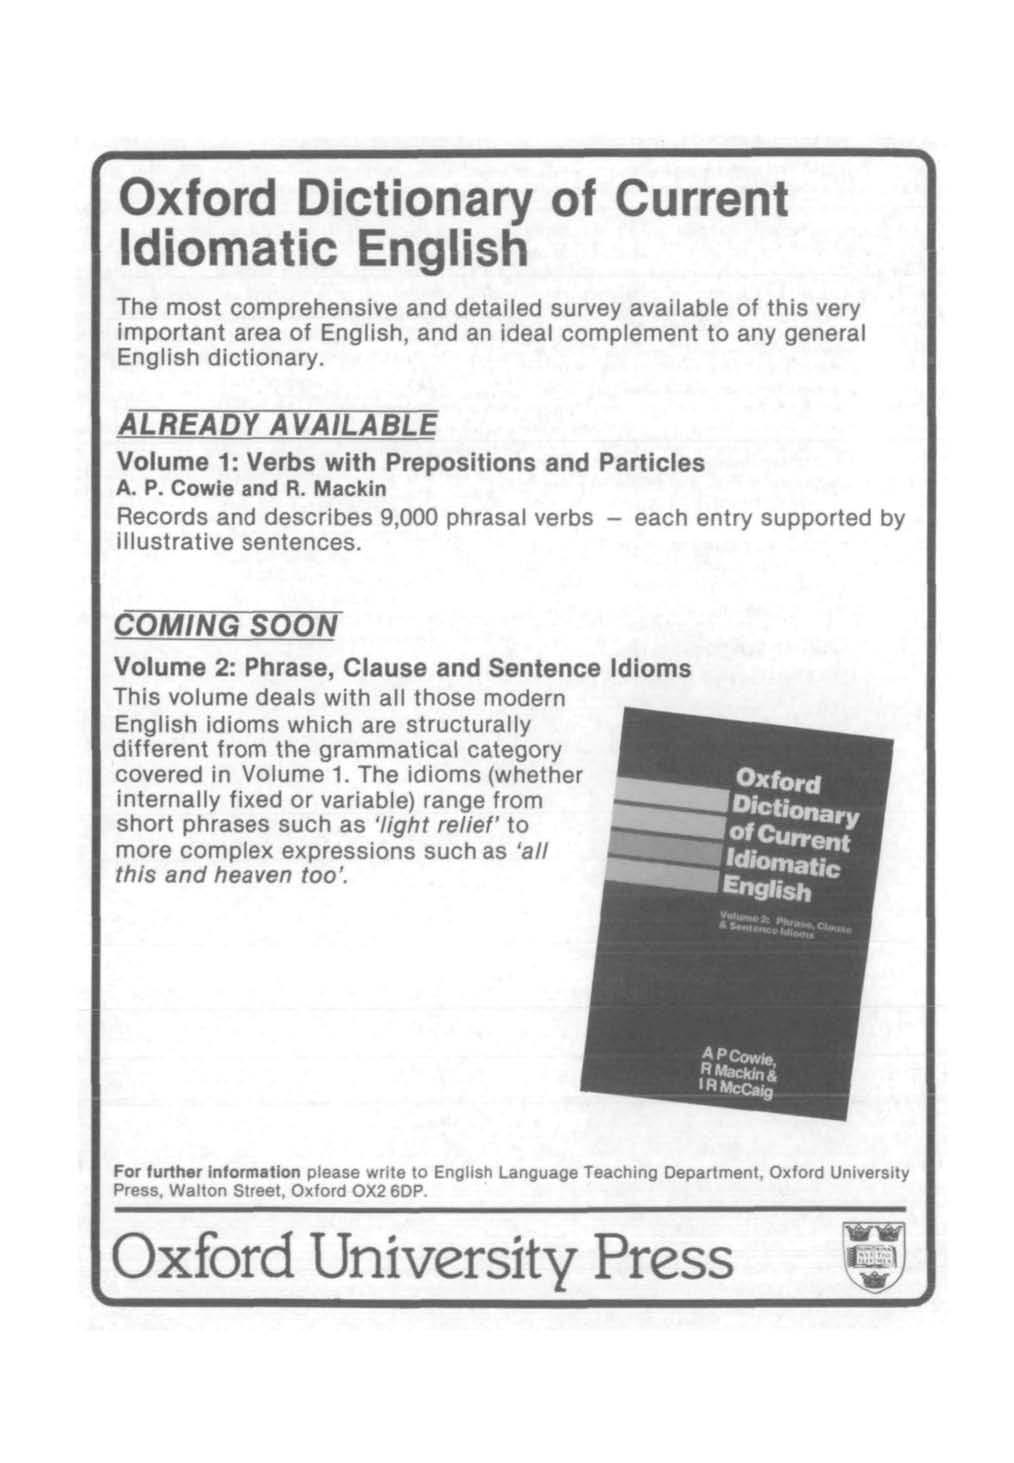 Oxford Dictionary of Current Idiomatic English The most comprehensive and detailed survey available of this very important area of English, and an ideal complement to any general English dictionary.